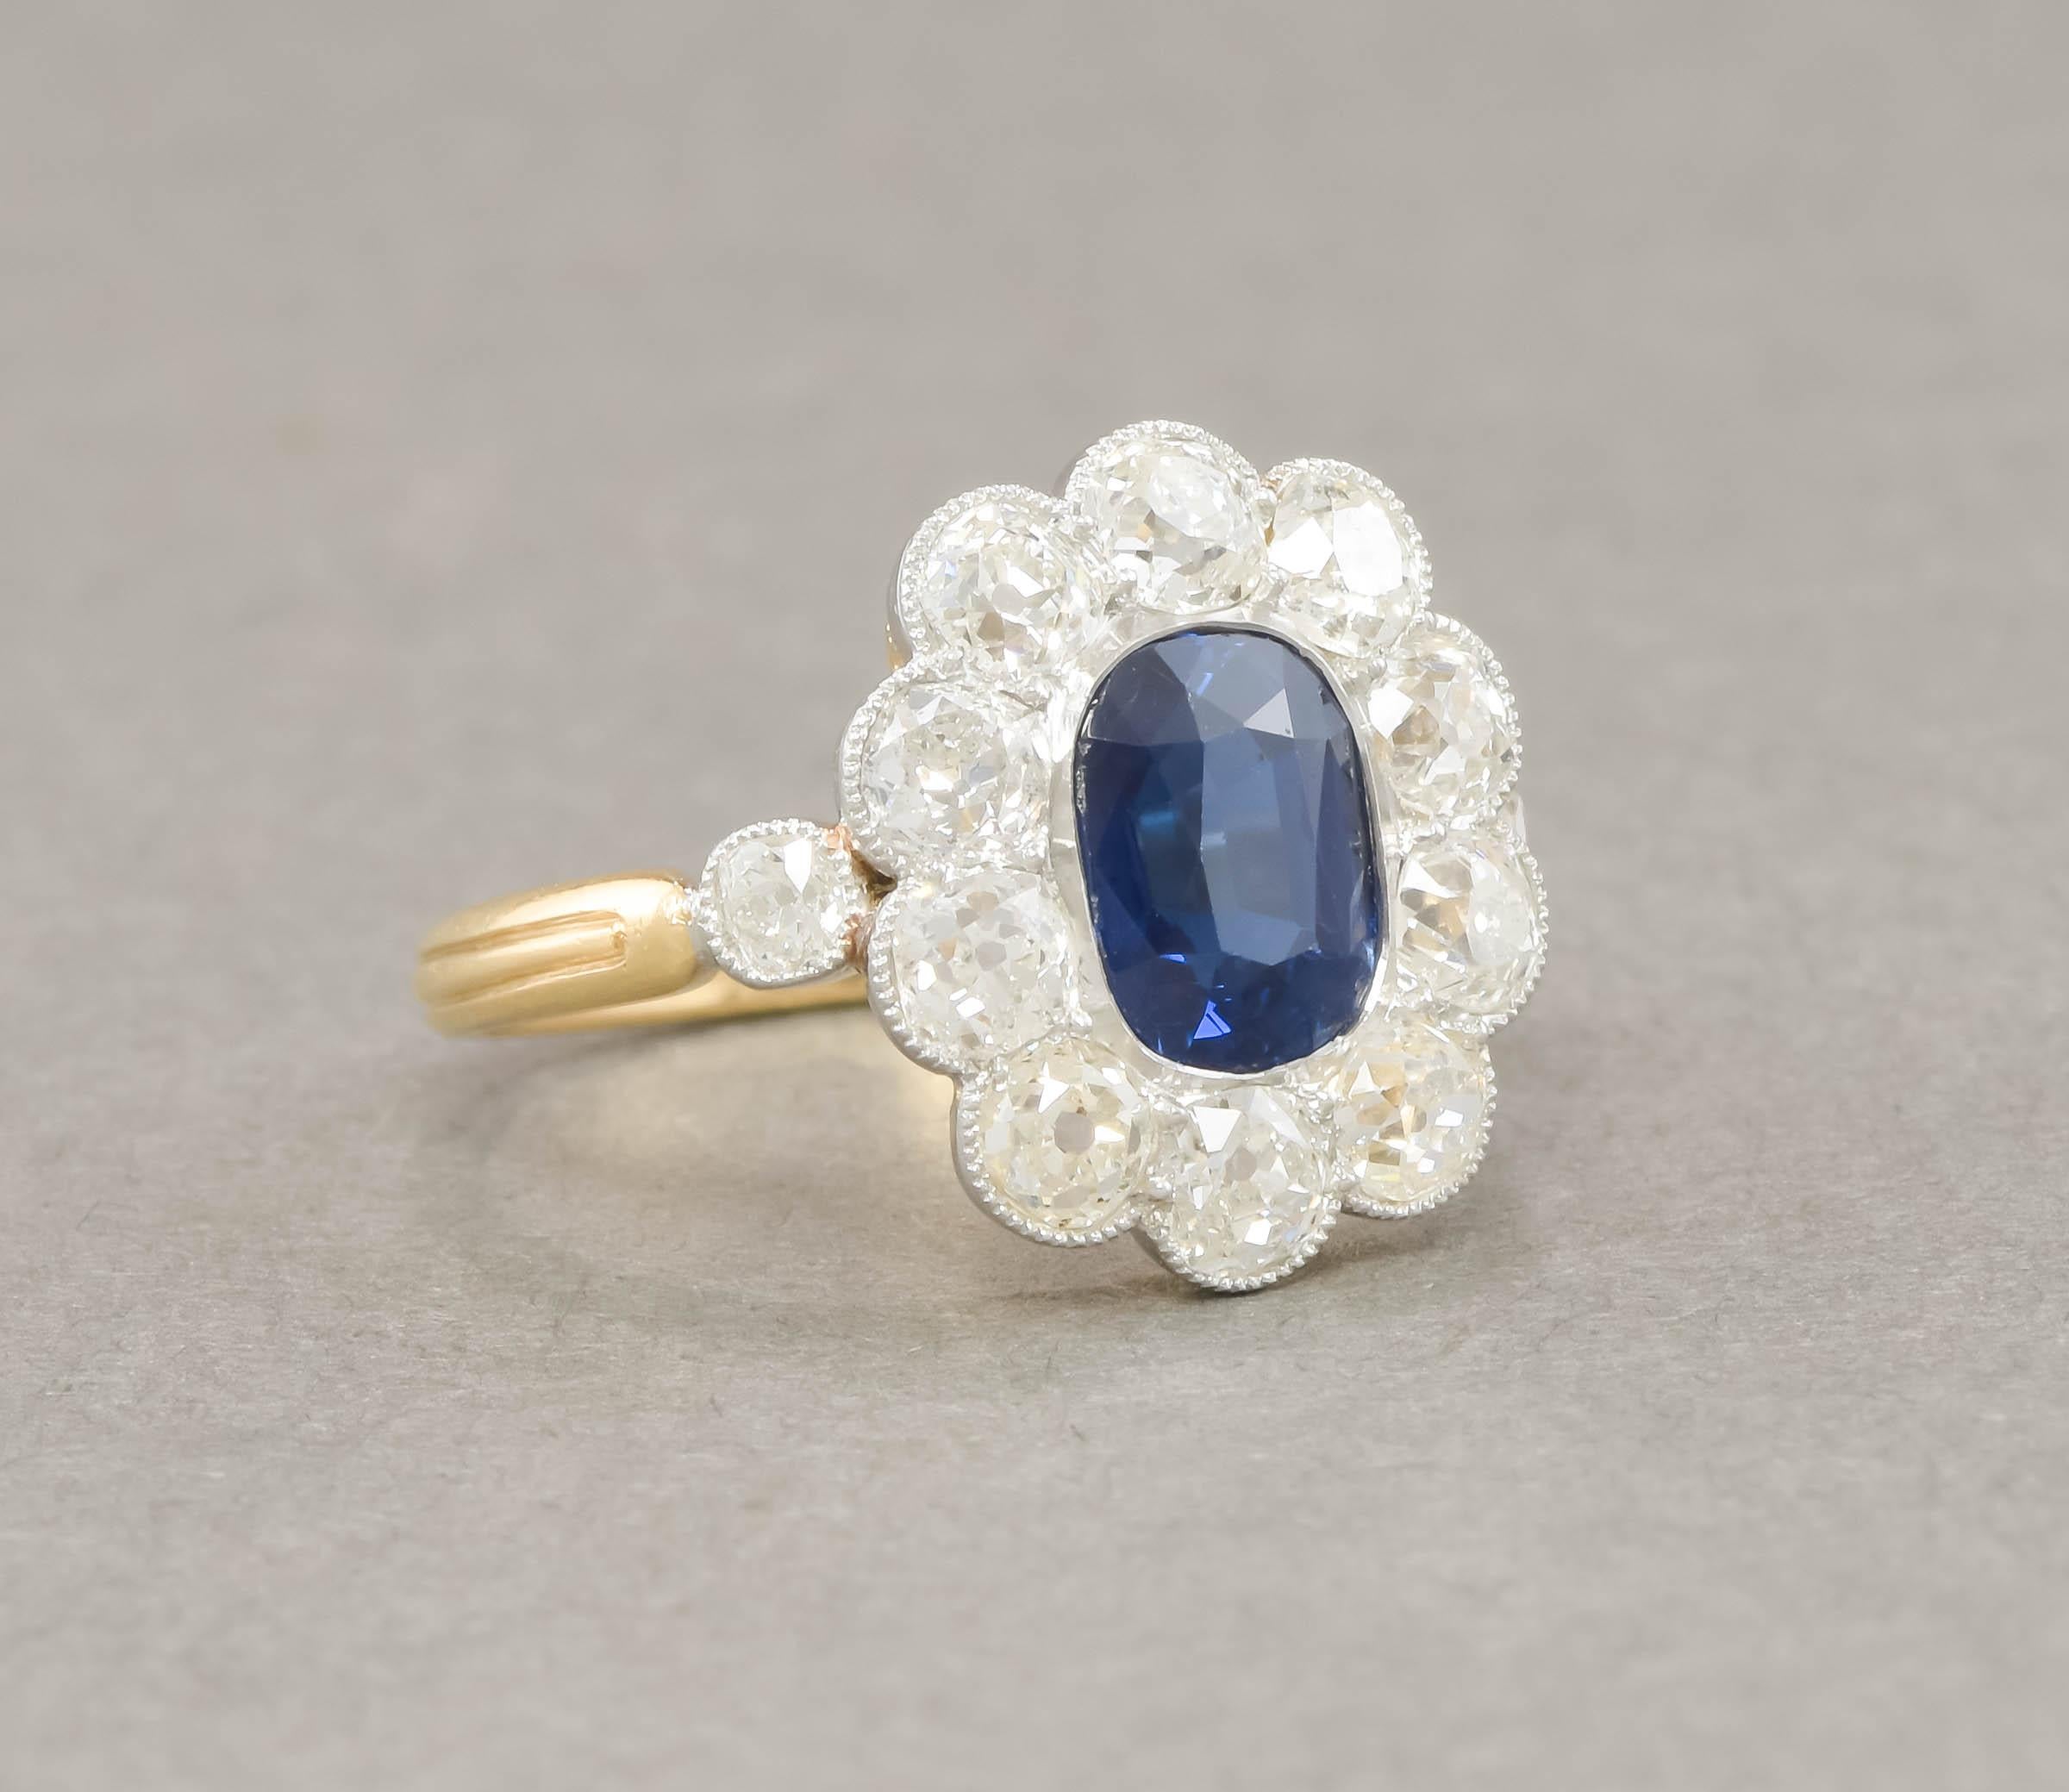 I'm pleased to offer this particularly lovely 18K gold and platinum no heat blue sapphire and old cut diamond ring, that comes with its AGL prestige gemstone report.  Total estimated gem carat weight in the ring is estimated at approximately 3.89